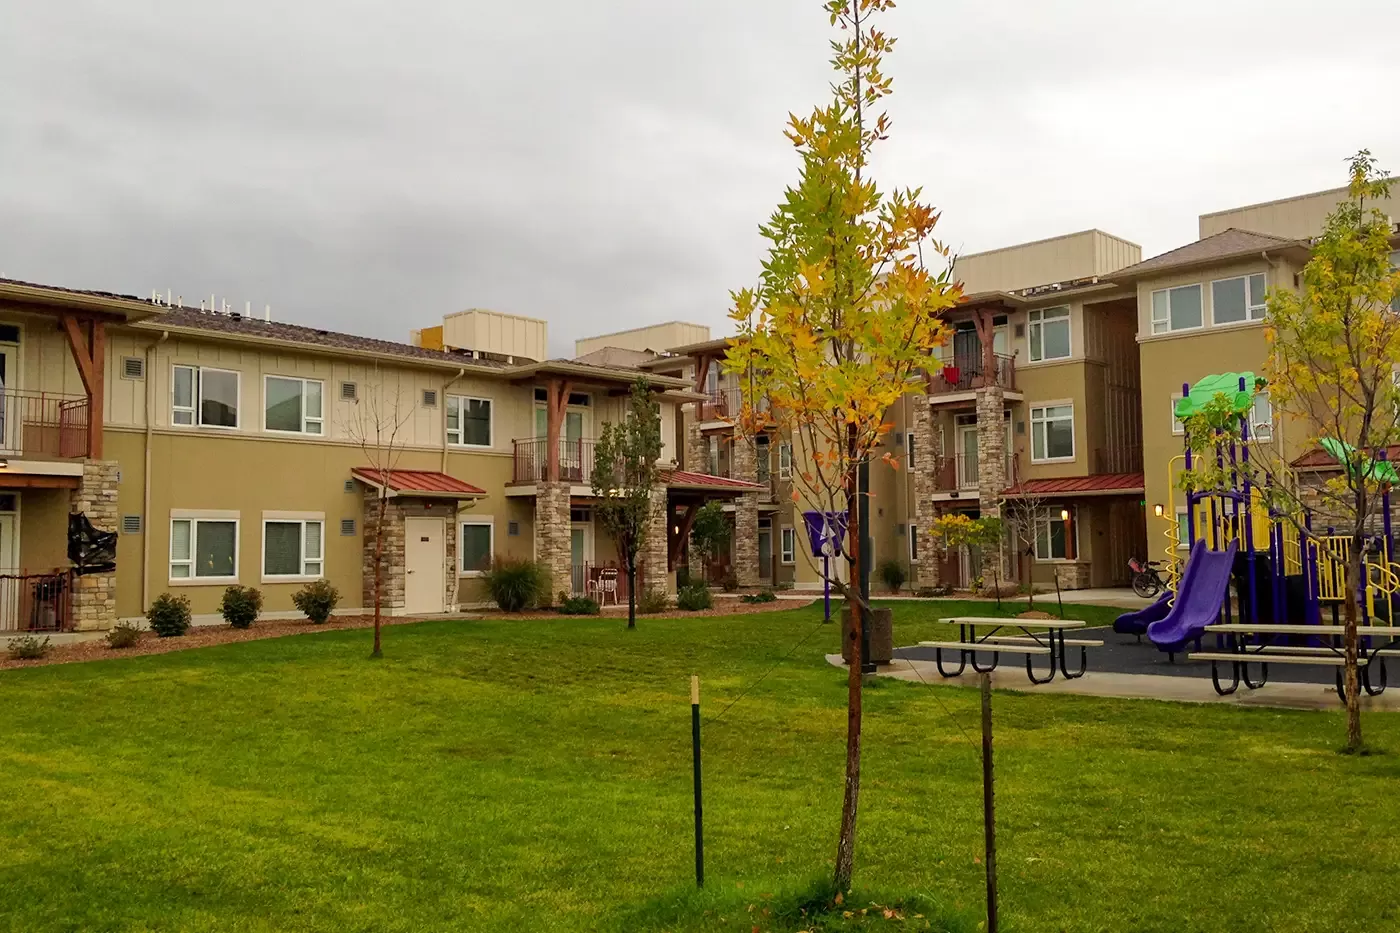 Photo of the Village Park Apartments in Grand Junction, Colorado